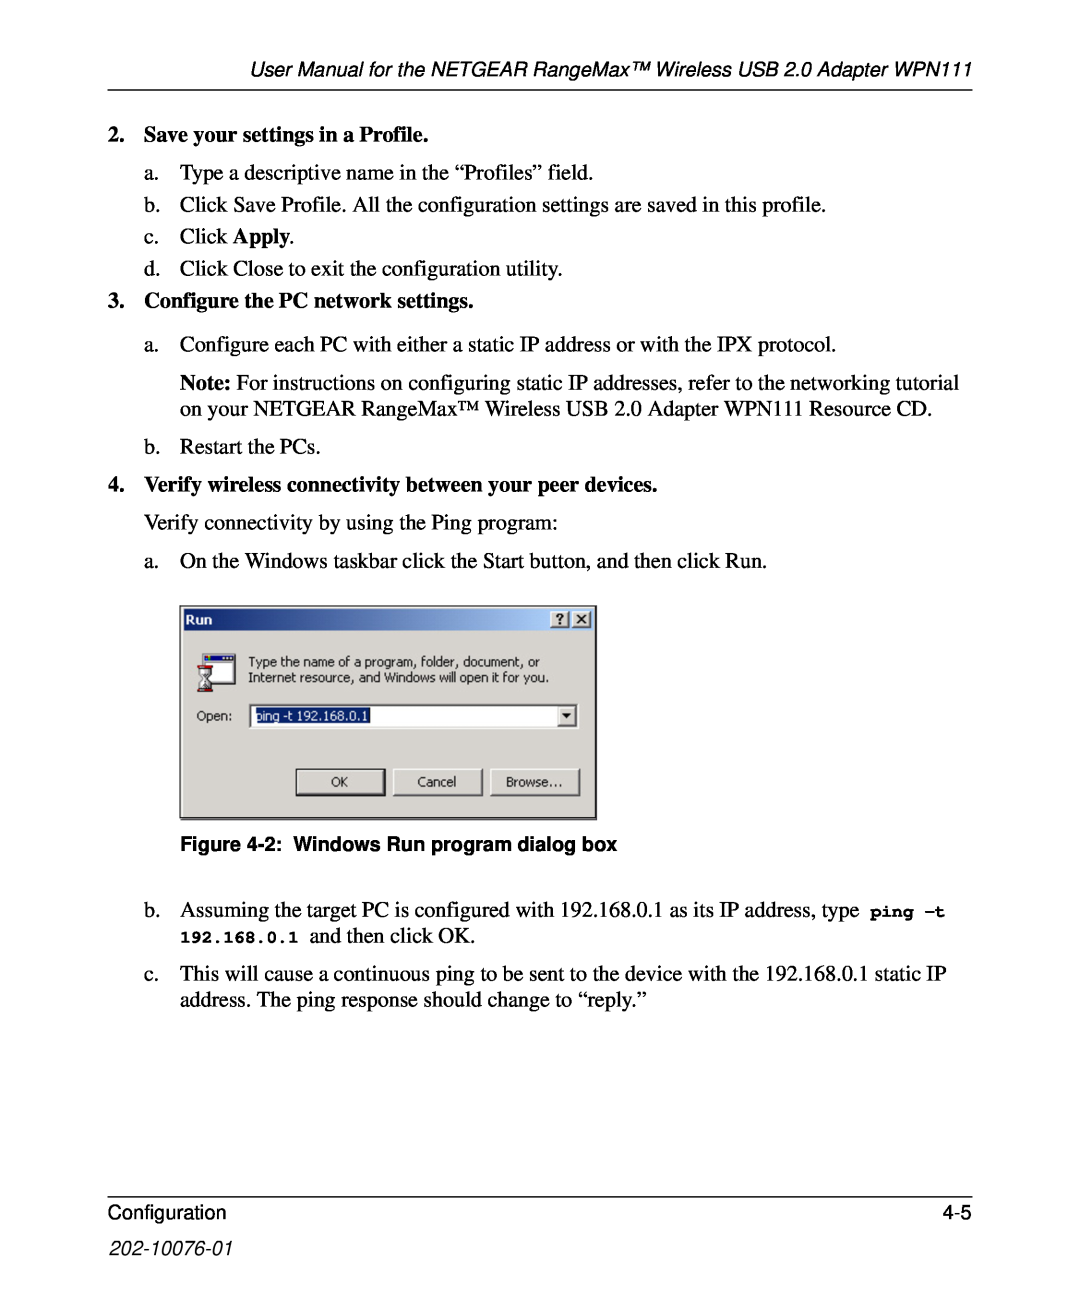 NETGEAR WPN111 user manual Save your settings in a Profile, Configure the PC network settings 